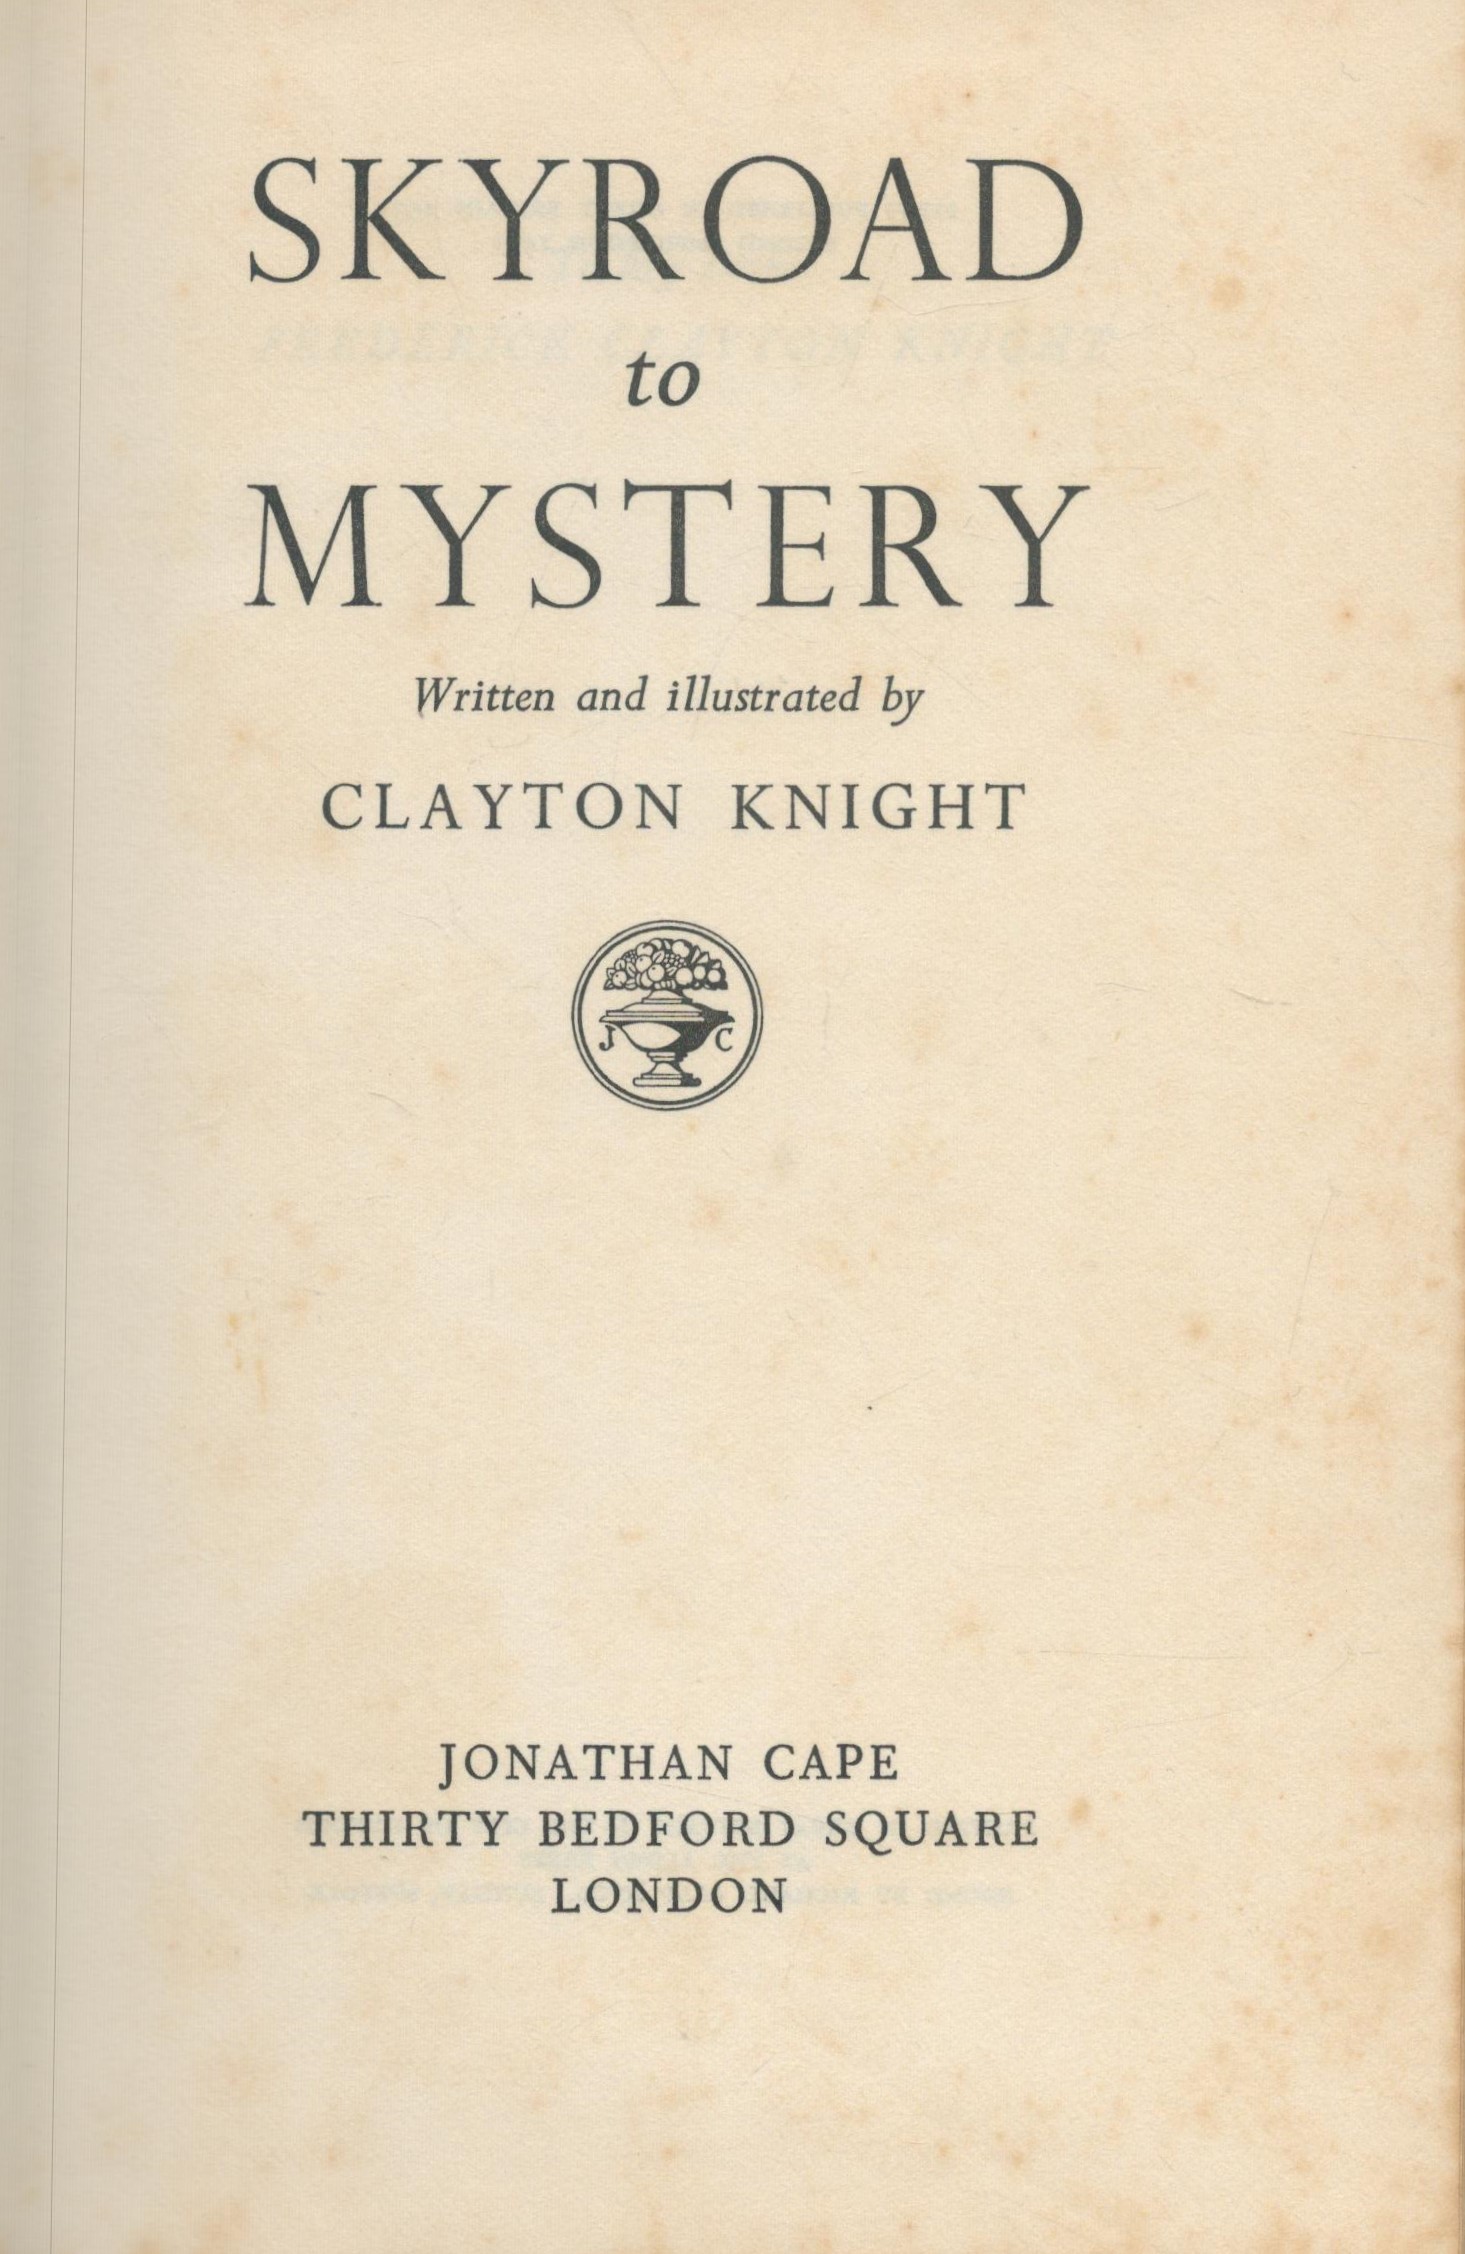 Sky road to Mystery by Clayton Knight 1961 hardback book with 222 pages, signs of ageing marks to - Image 2 of 3